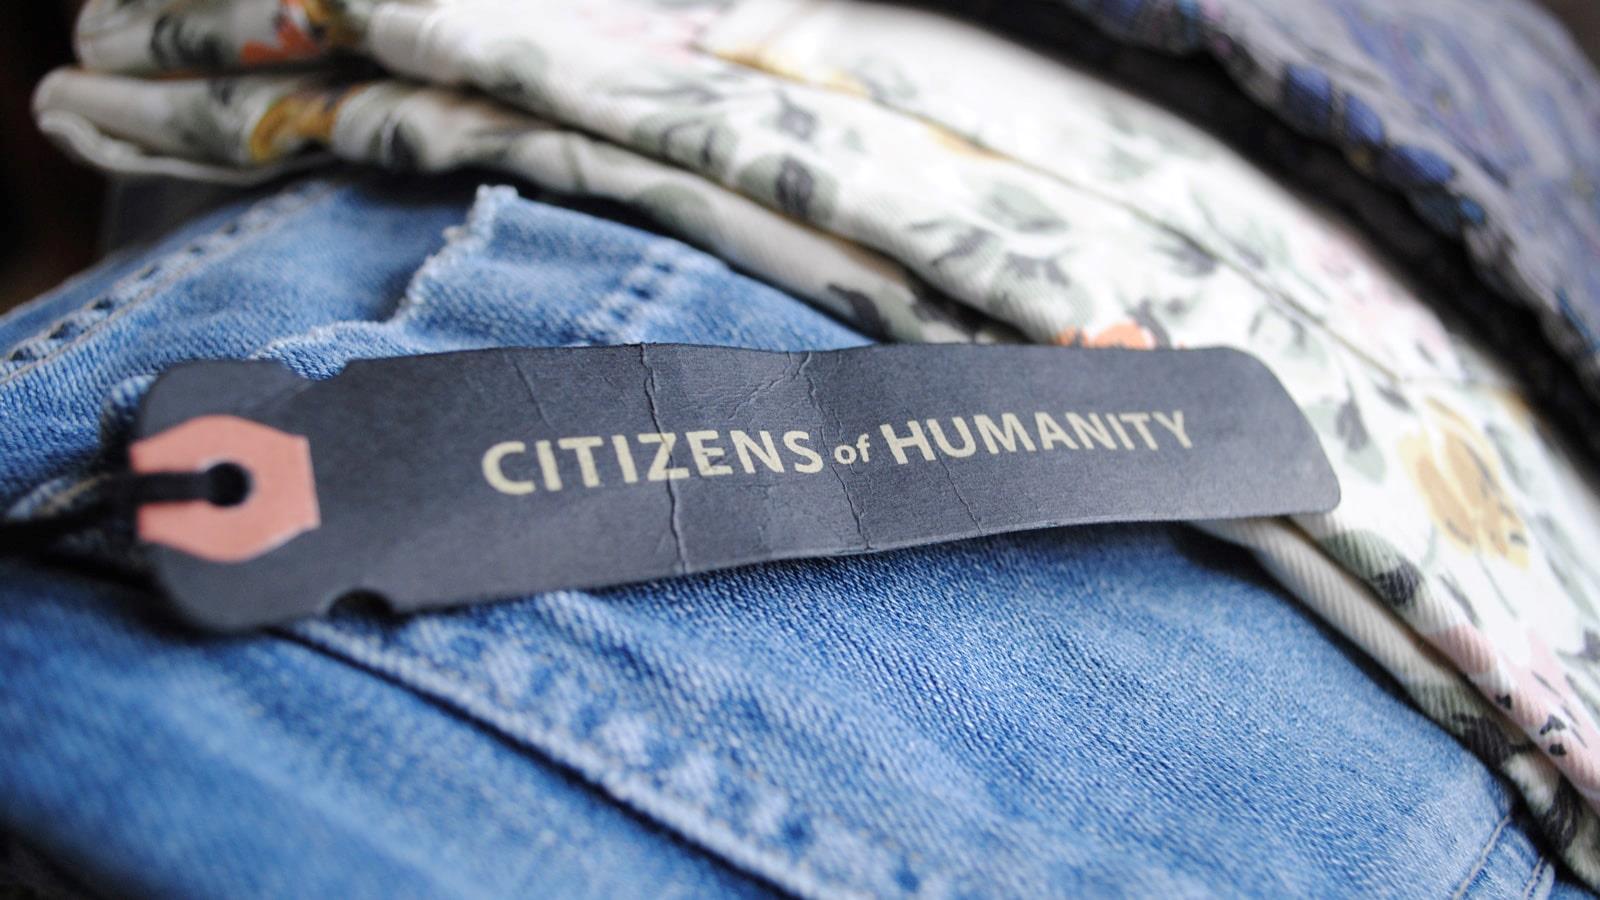 Blue jeans from Citizens of Humanity